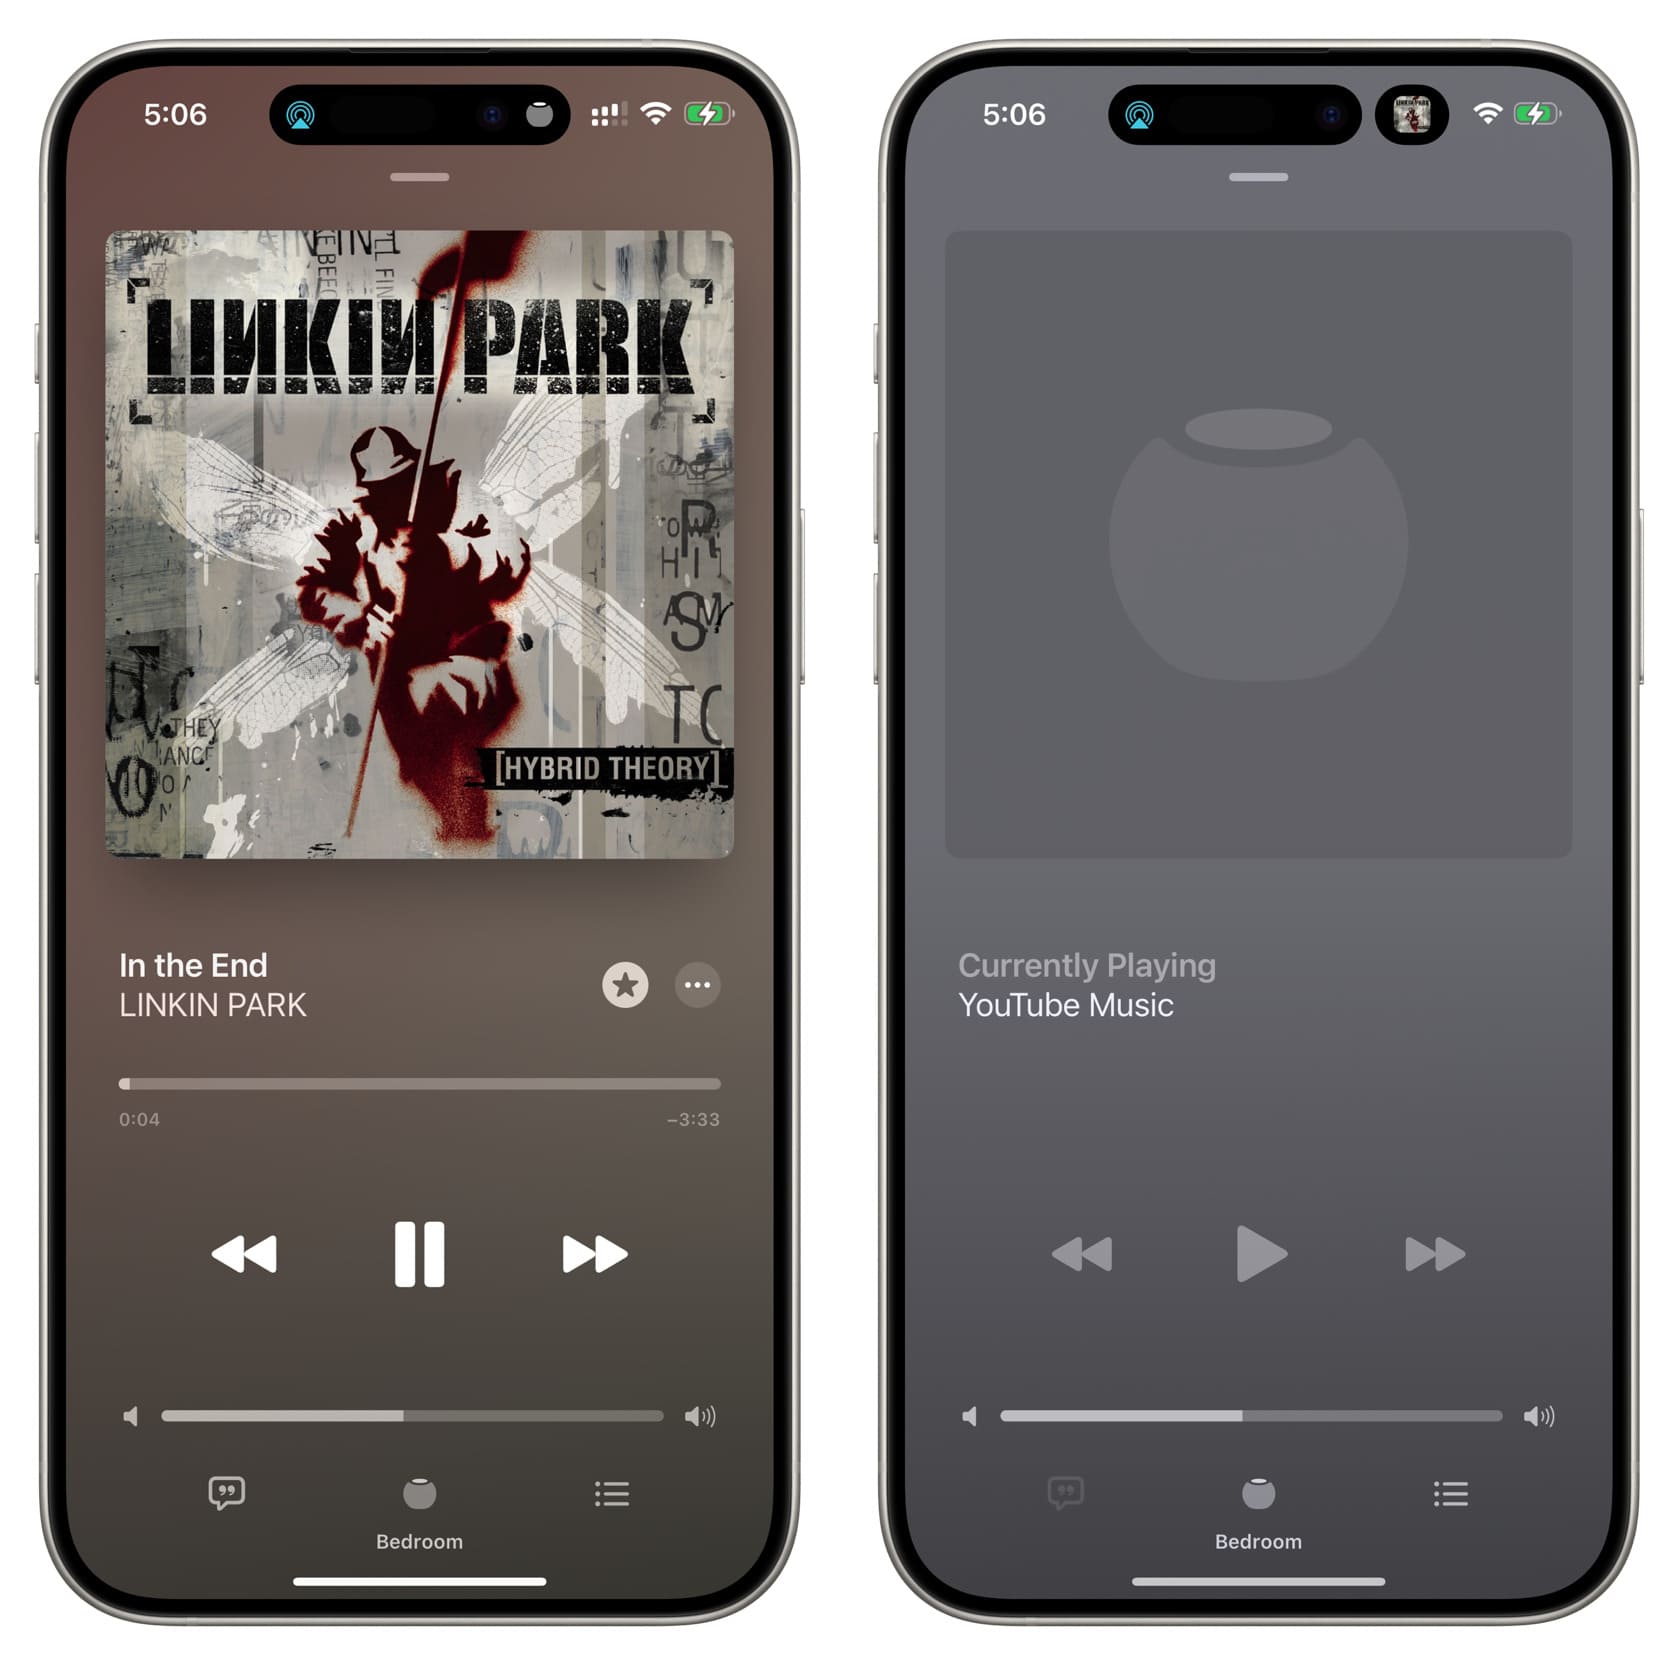 iPhone Music app when HomePod is playing from Apple Music and YouTube Music